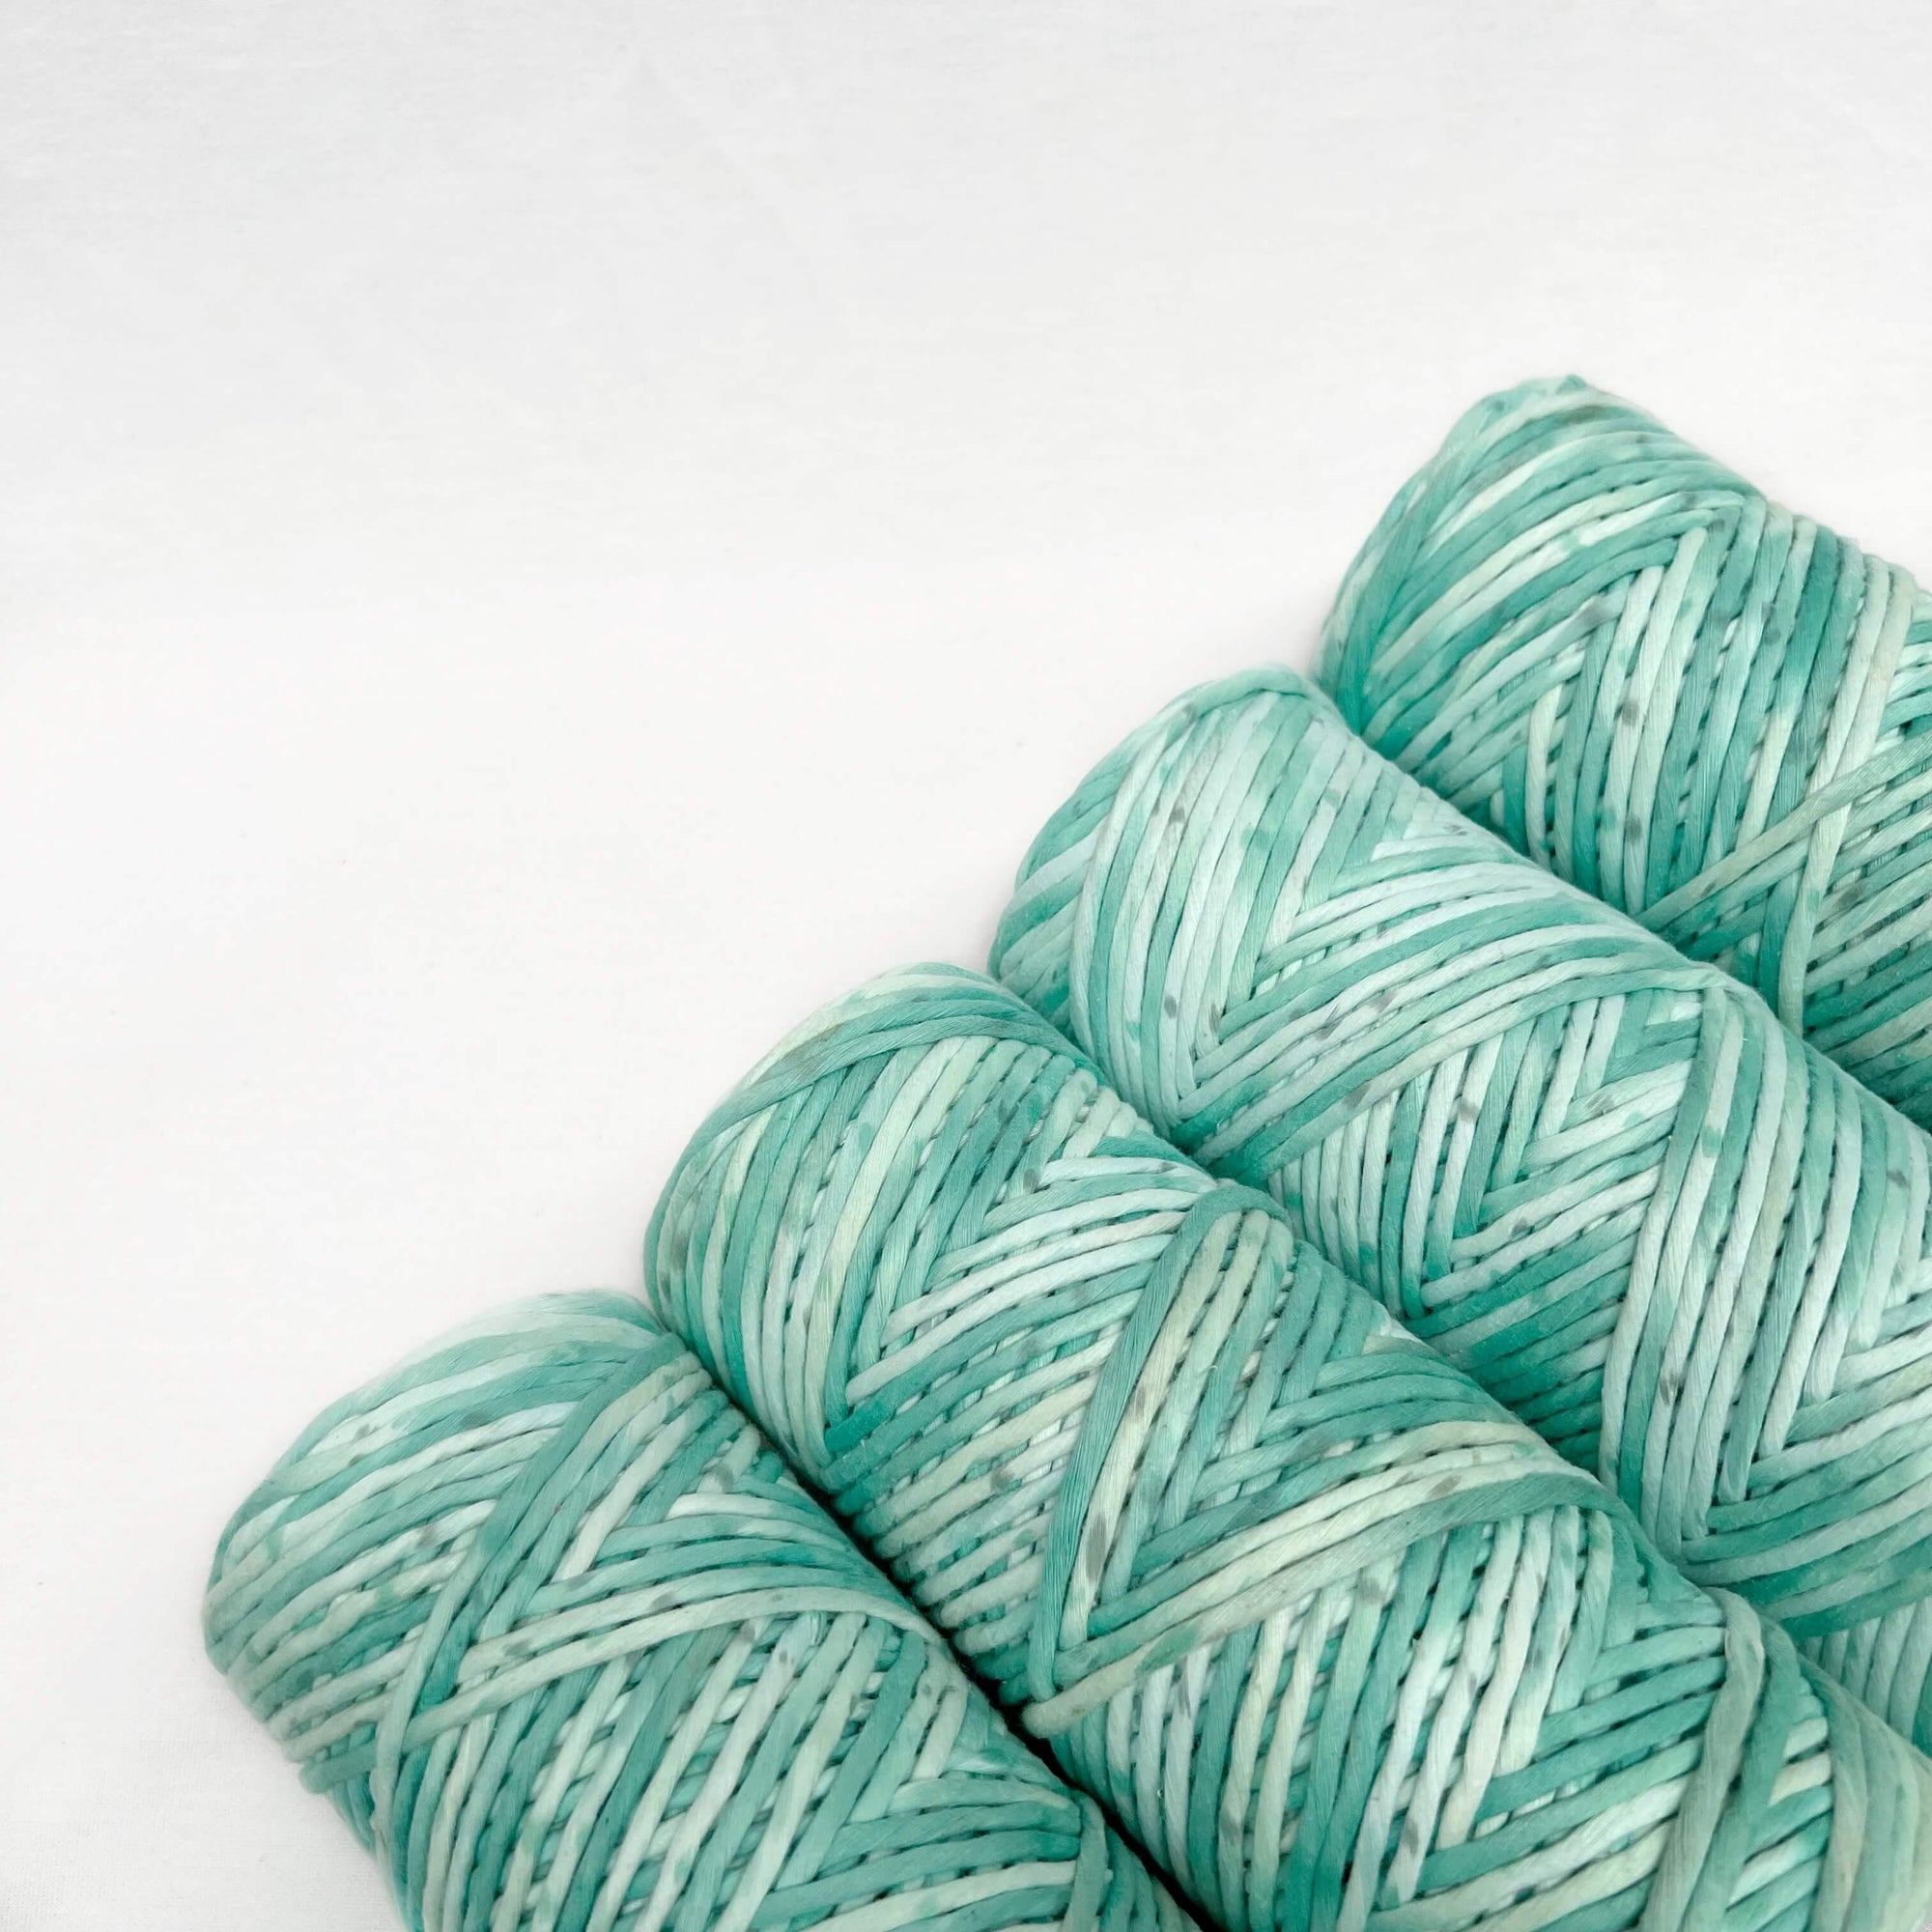 mint green macrame cord laying against white background to show quality and texture